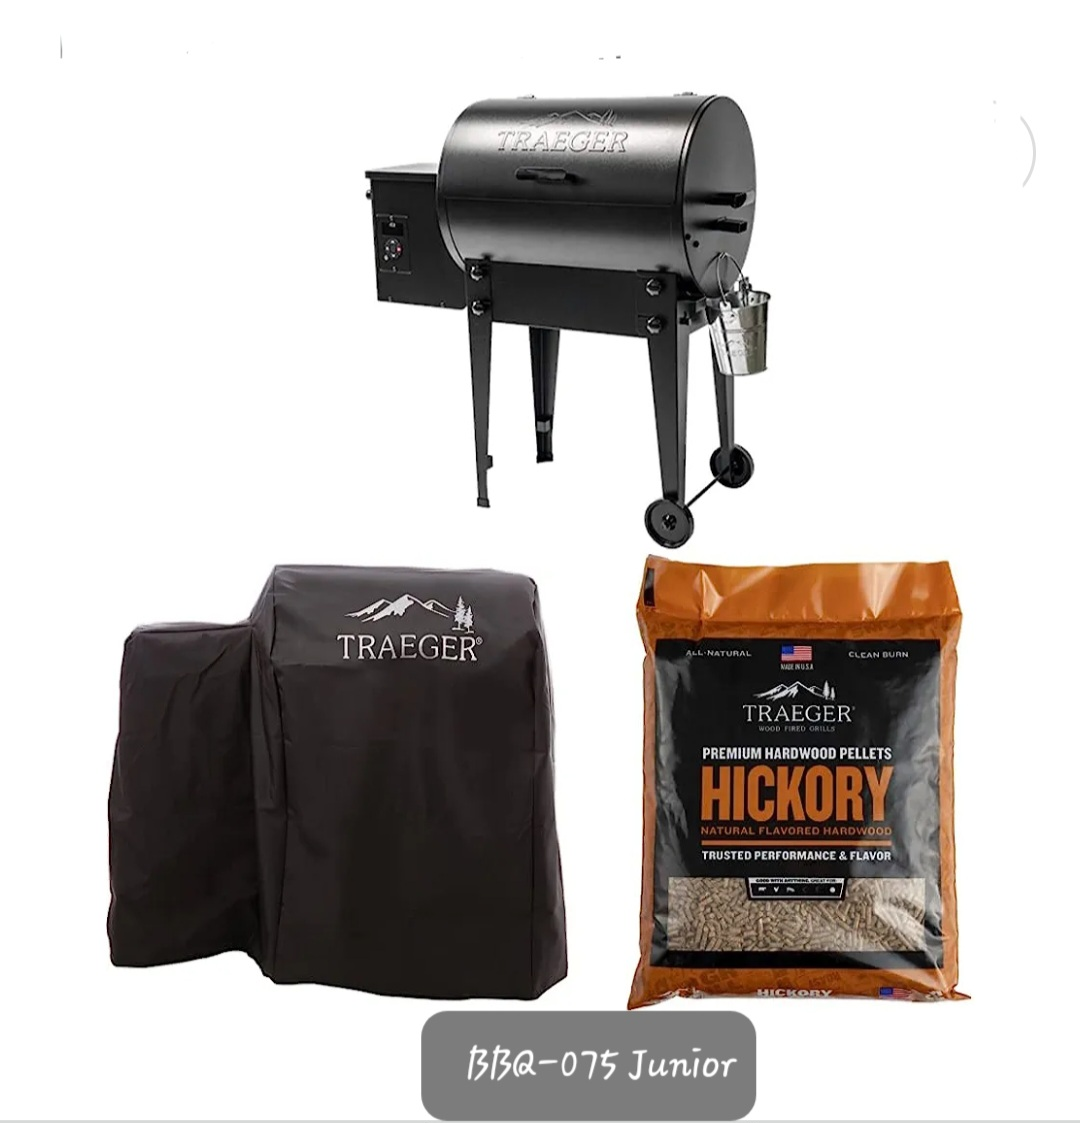 TRAEGER WOOD PELLET BBQ BBQ-075  TRAEGER WOOD PELLET BBQ BBQ-075 Junior wood pellet grille, smoker c/w full grill cover (new), wood pellets, BBQ scrapper brush and instructions, 110V plug in. Viewable this Friday, Saturday, Sunday only $400.00 1+780 441-5825